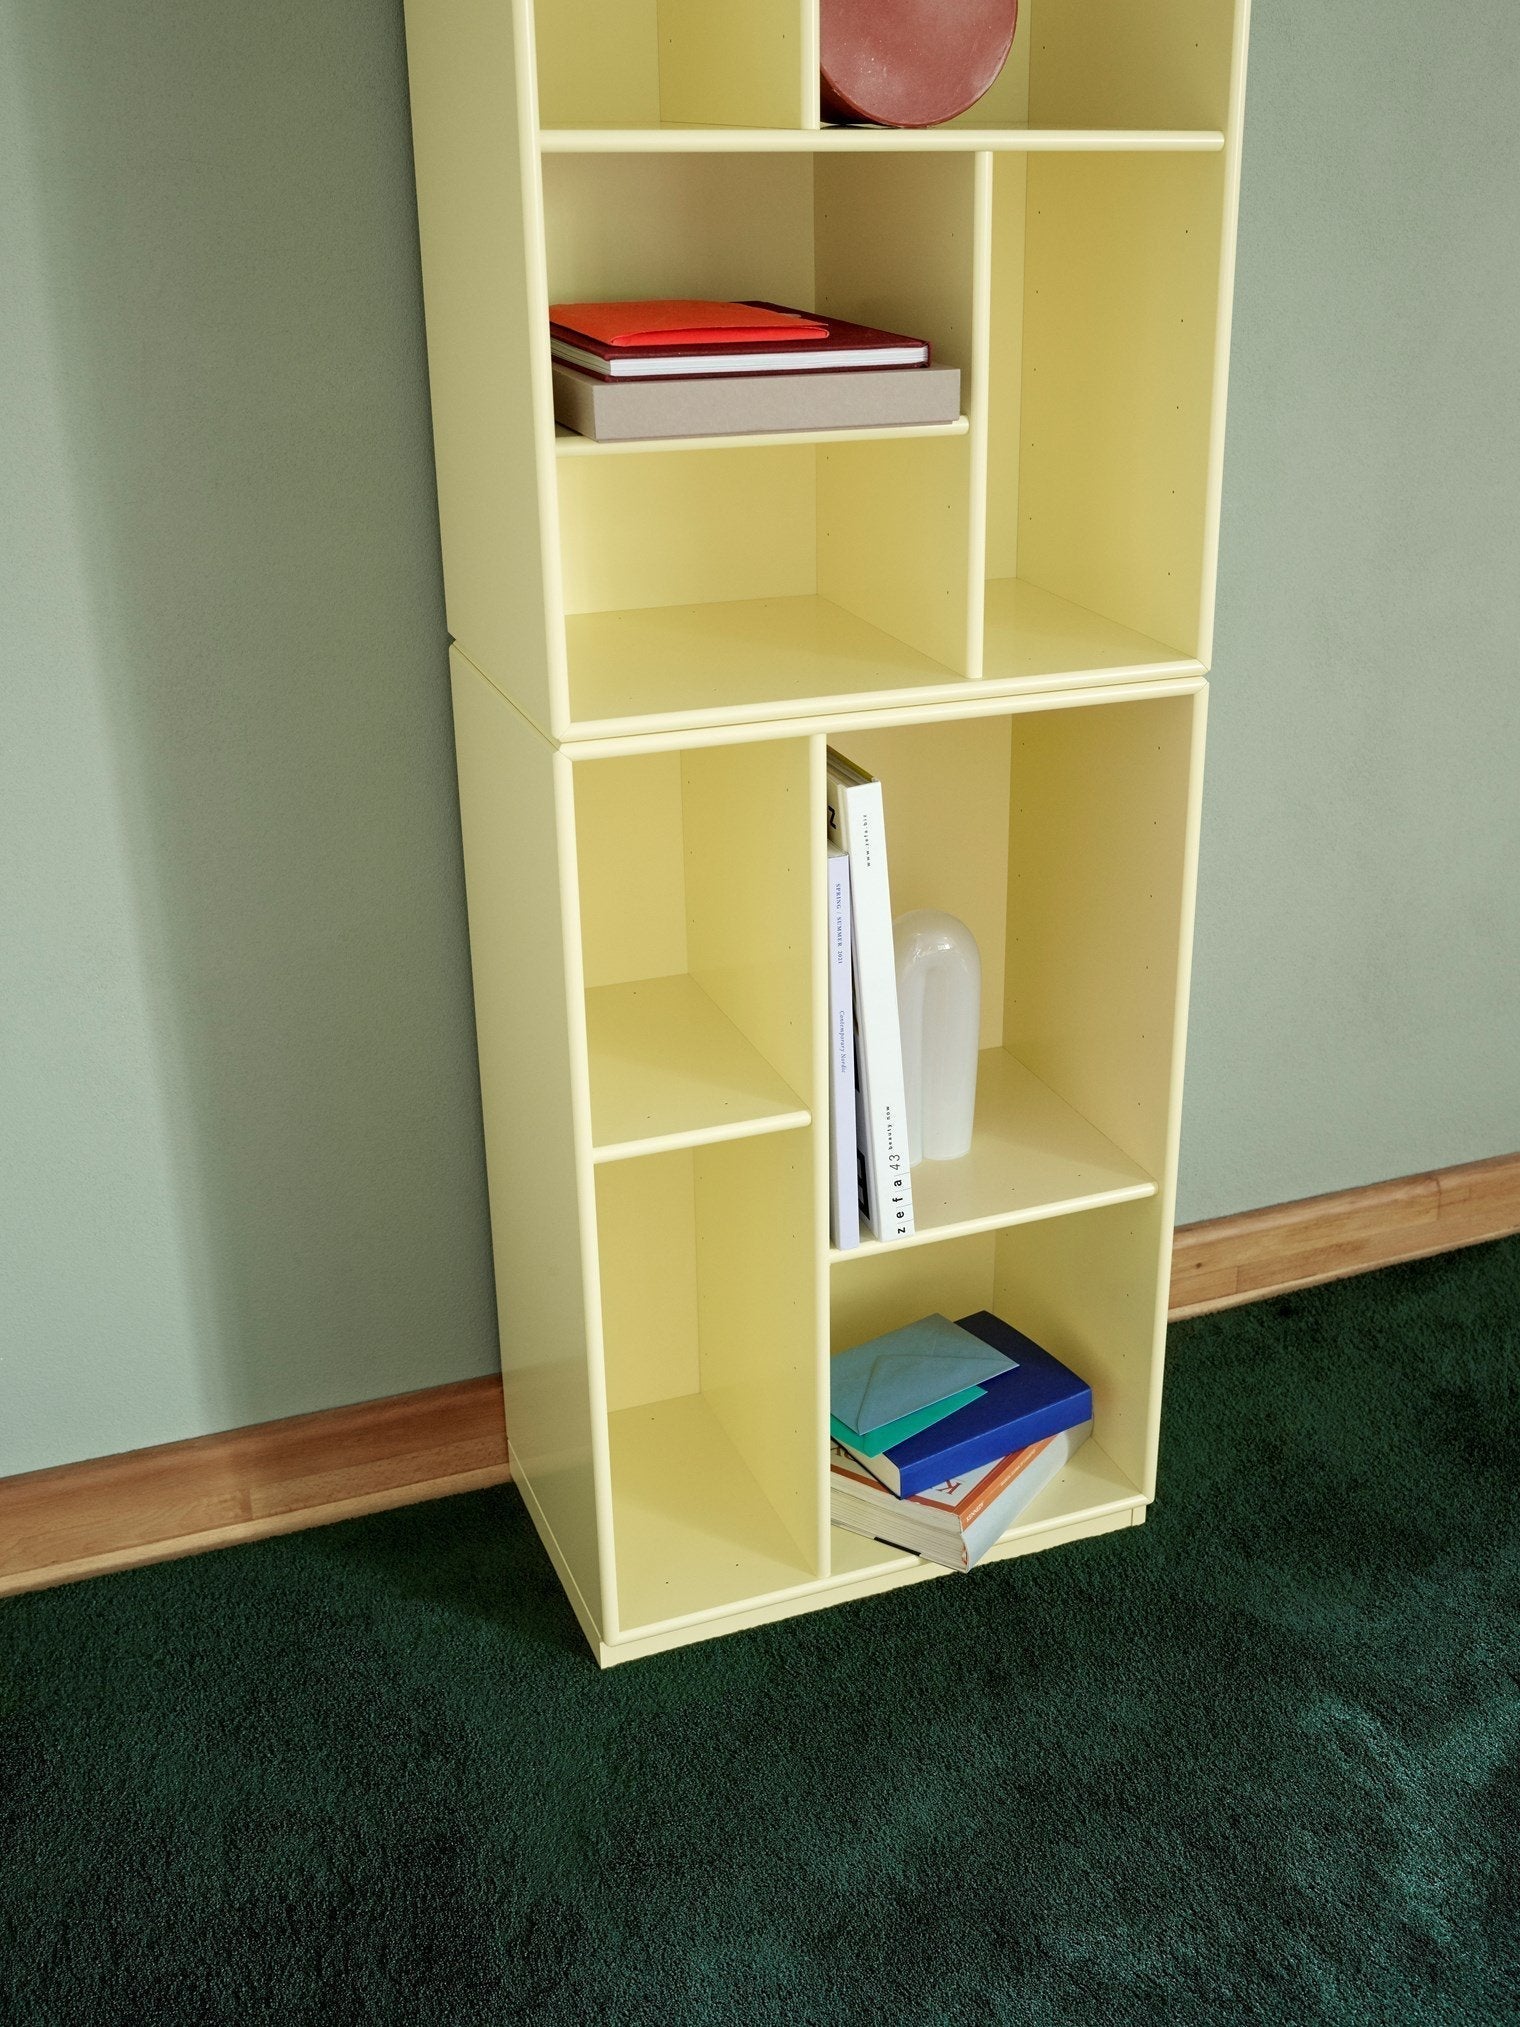 Montana Loom High Bookcase With 7 Cm Plinth, Parsley Green